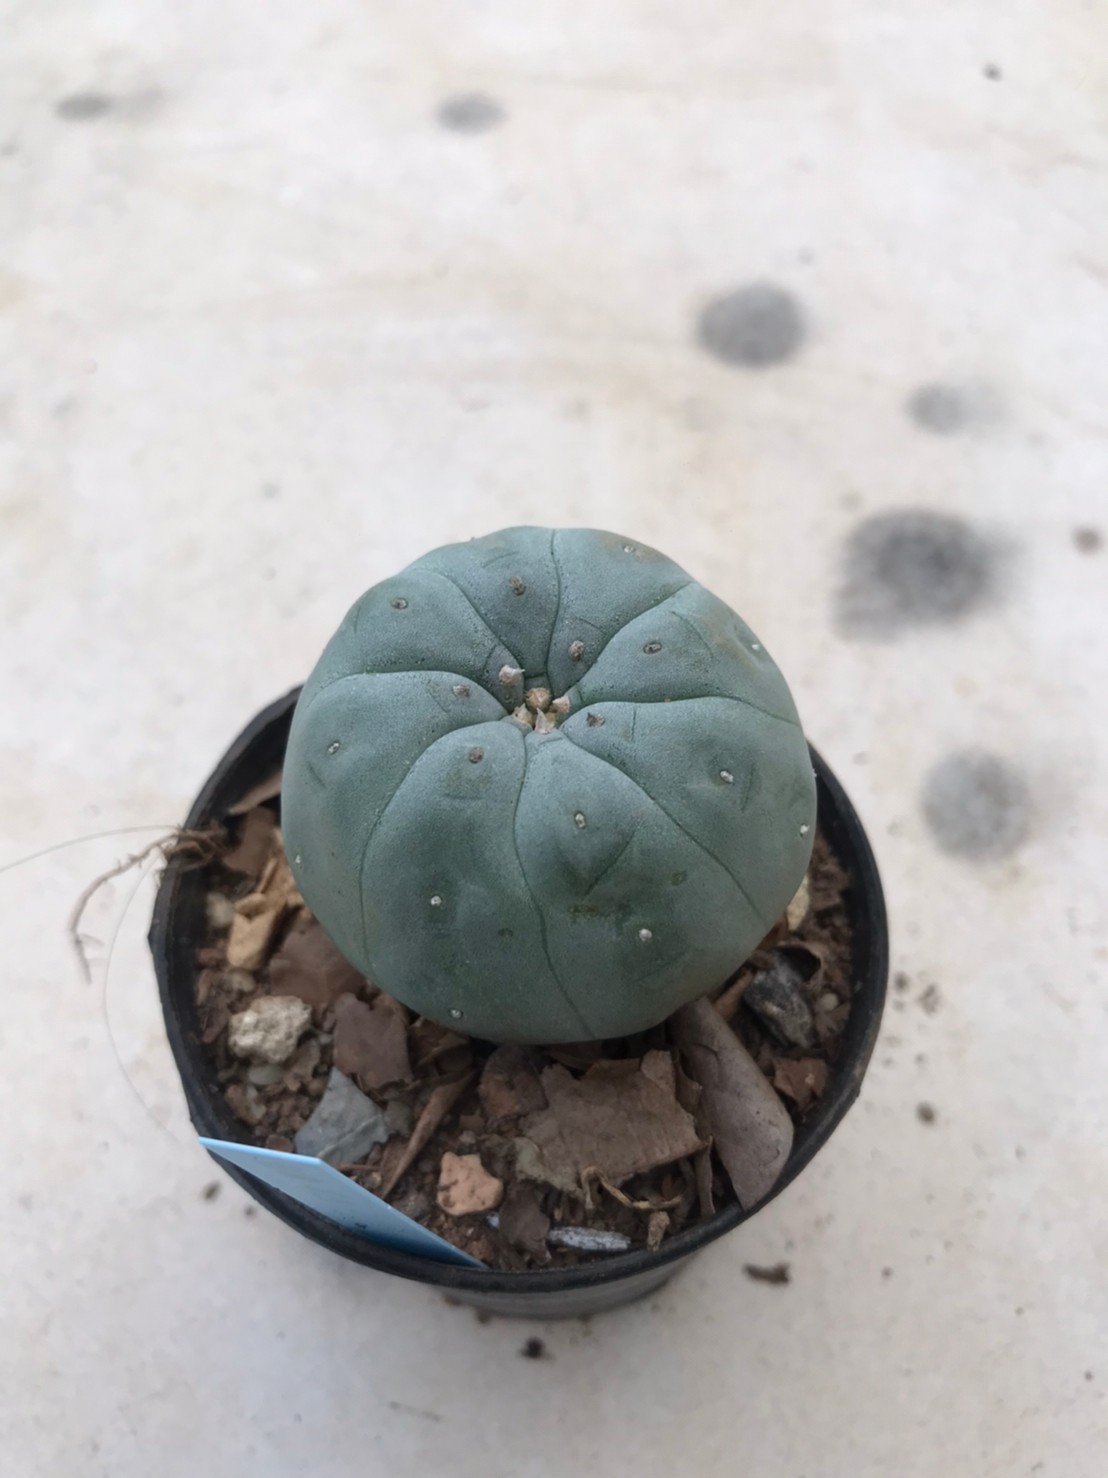 Lophophora williamsii  9 years old-grow from seed-can give flower and seed